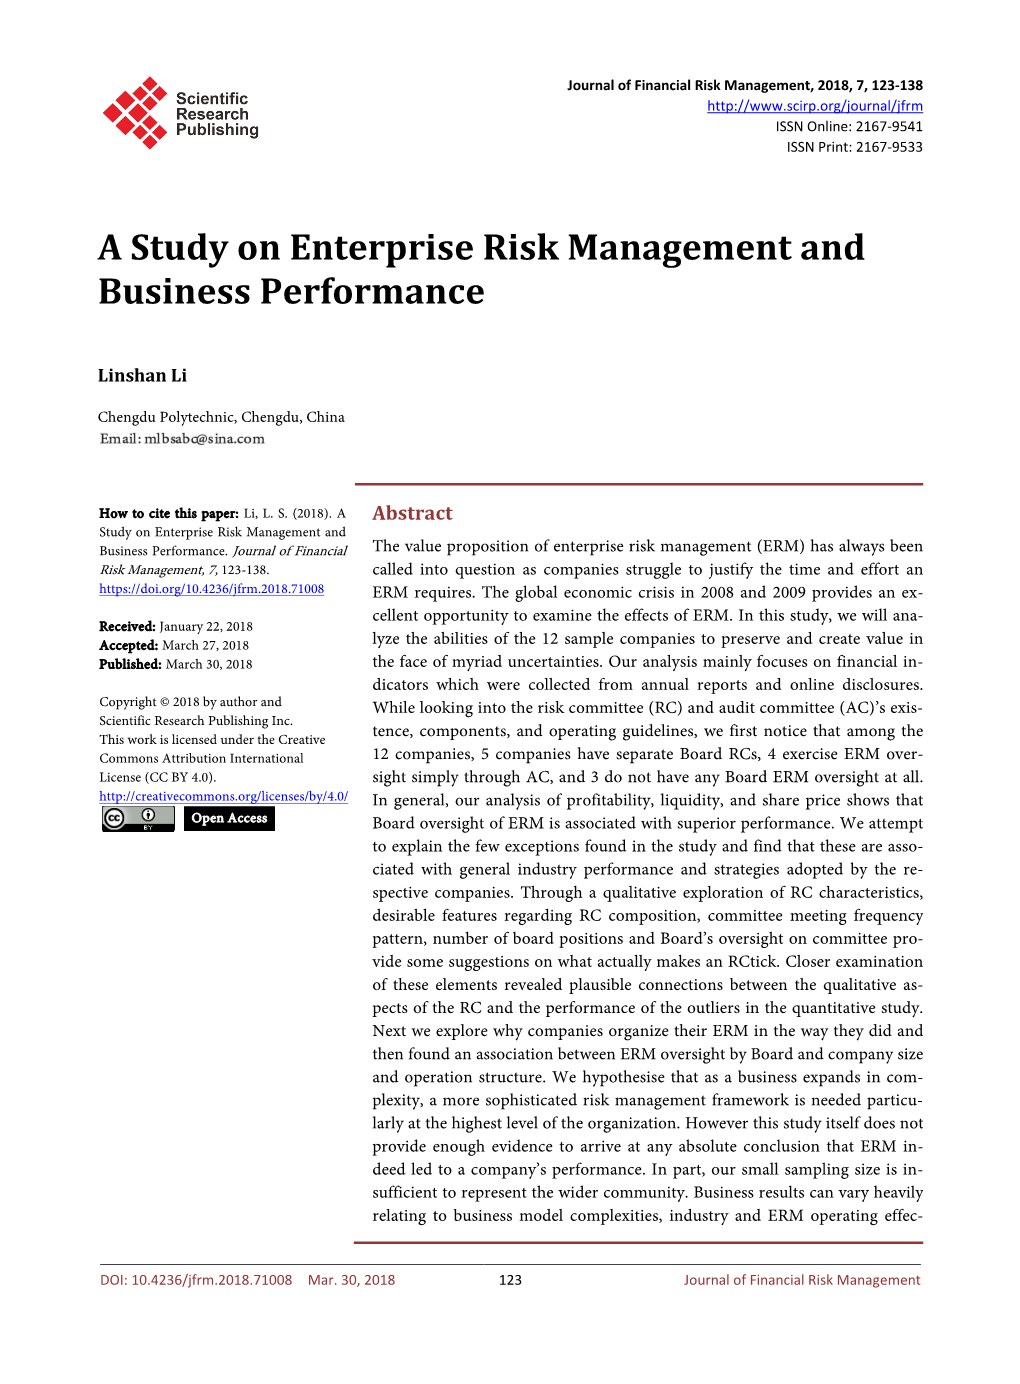 A Study on Enterprise Risk Management and Business Performance